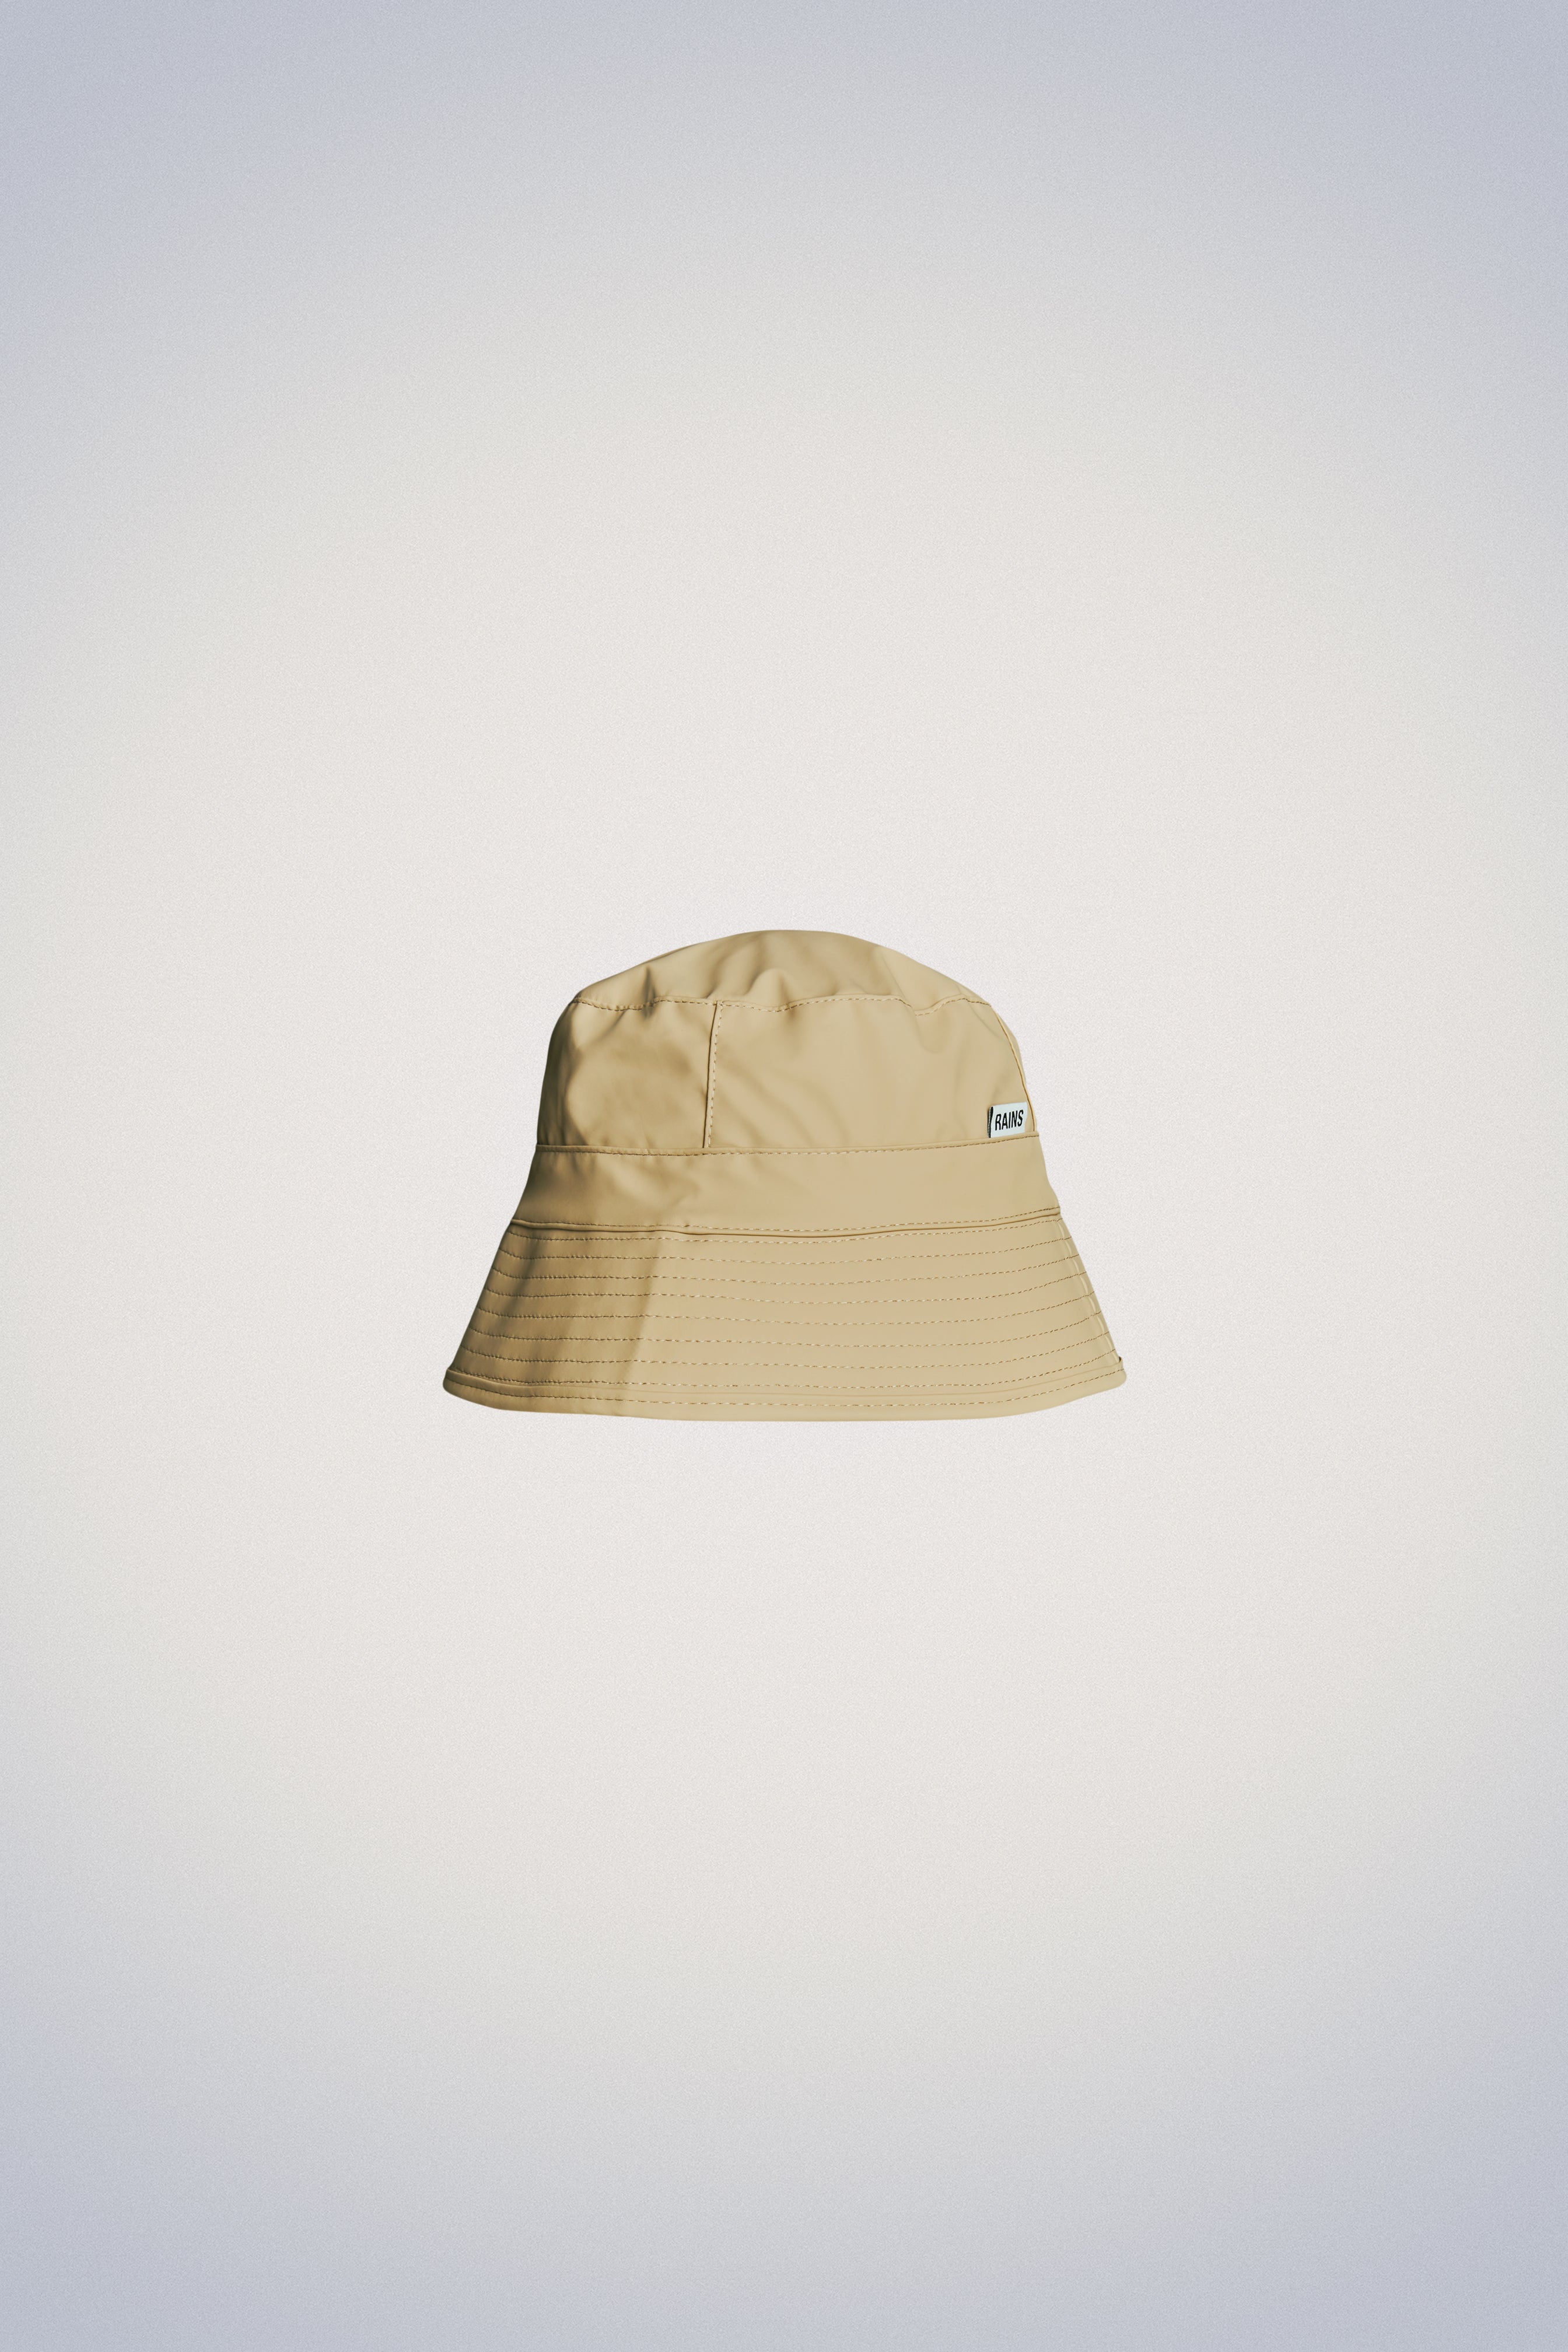 Rains® Bucket Hat in Green for $50